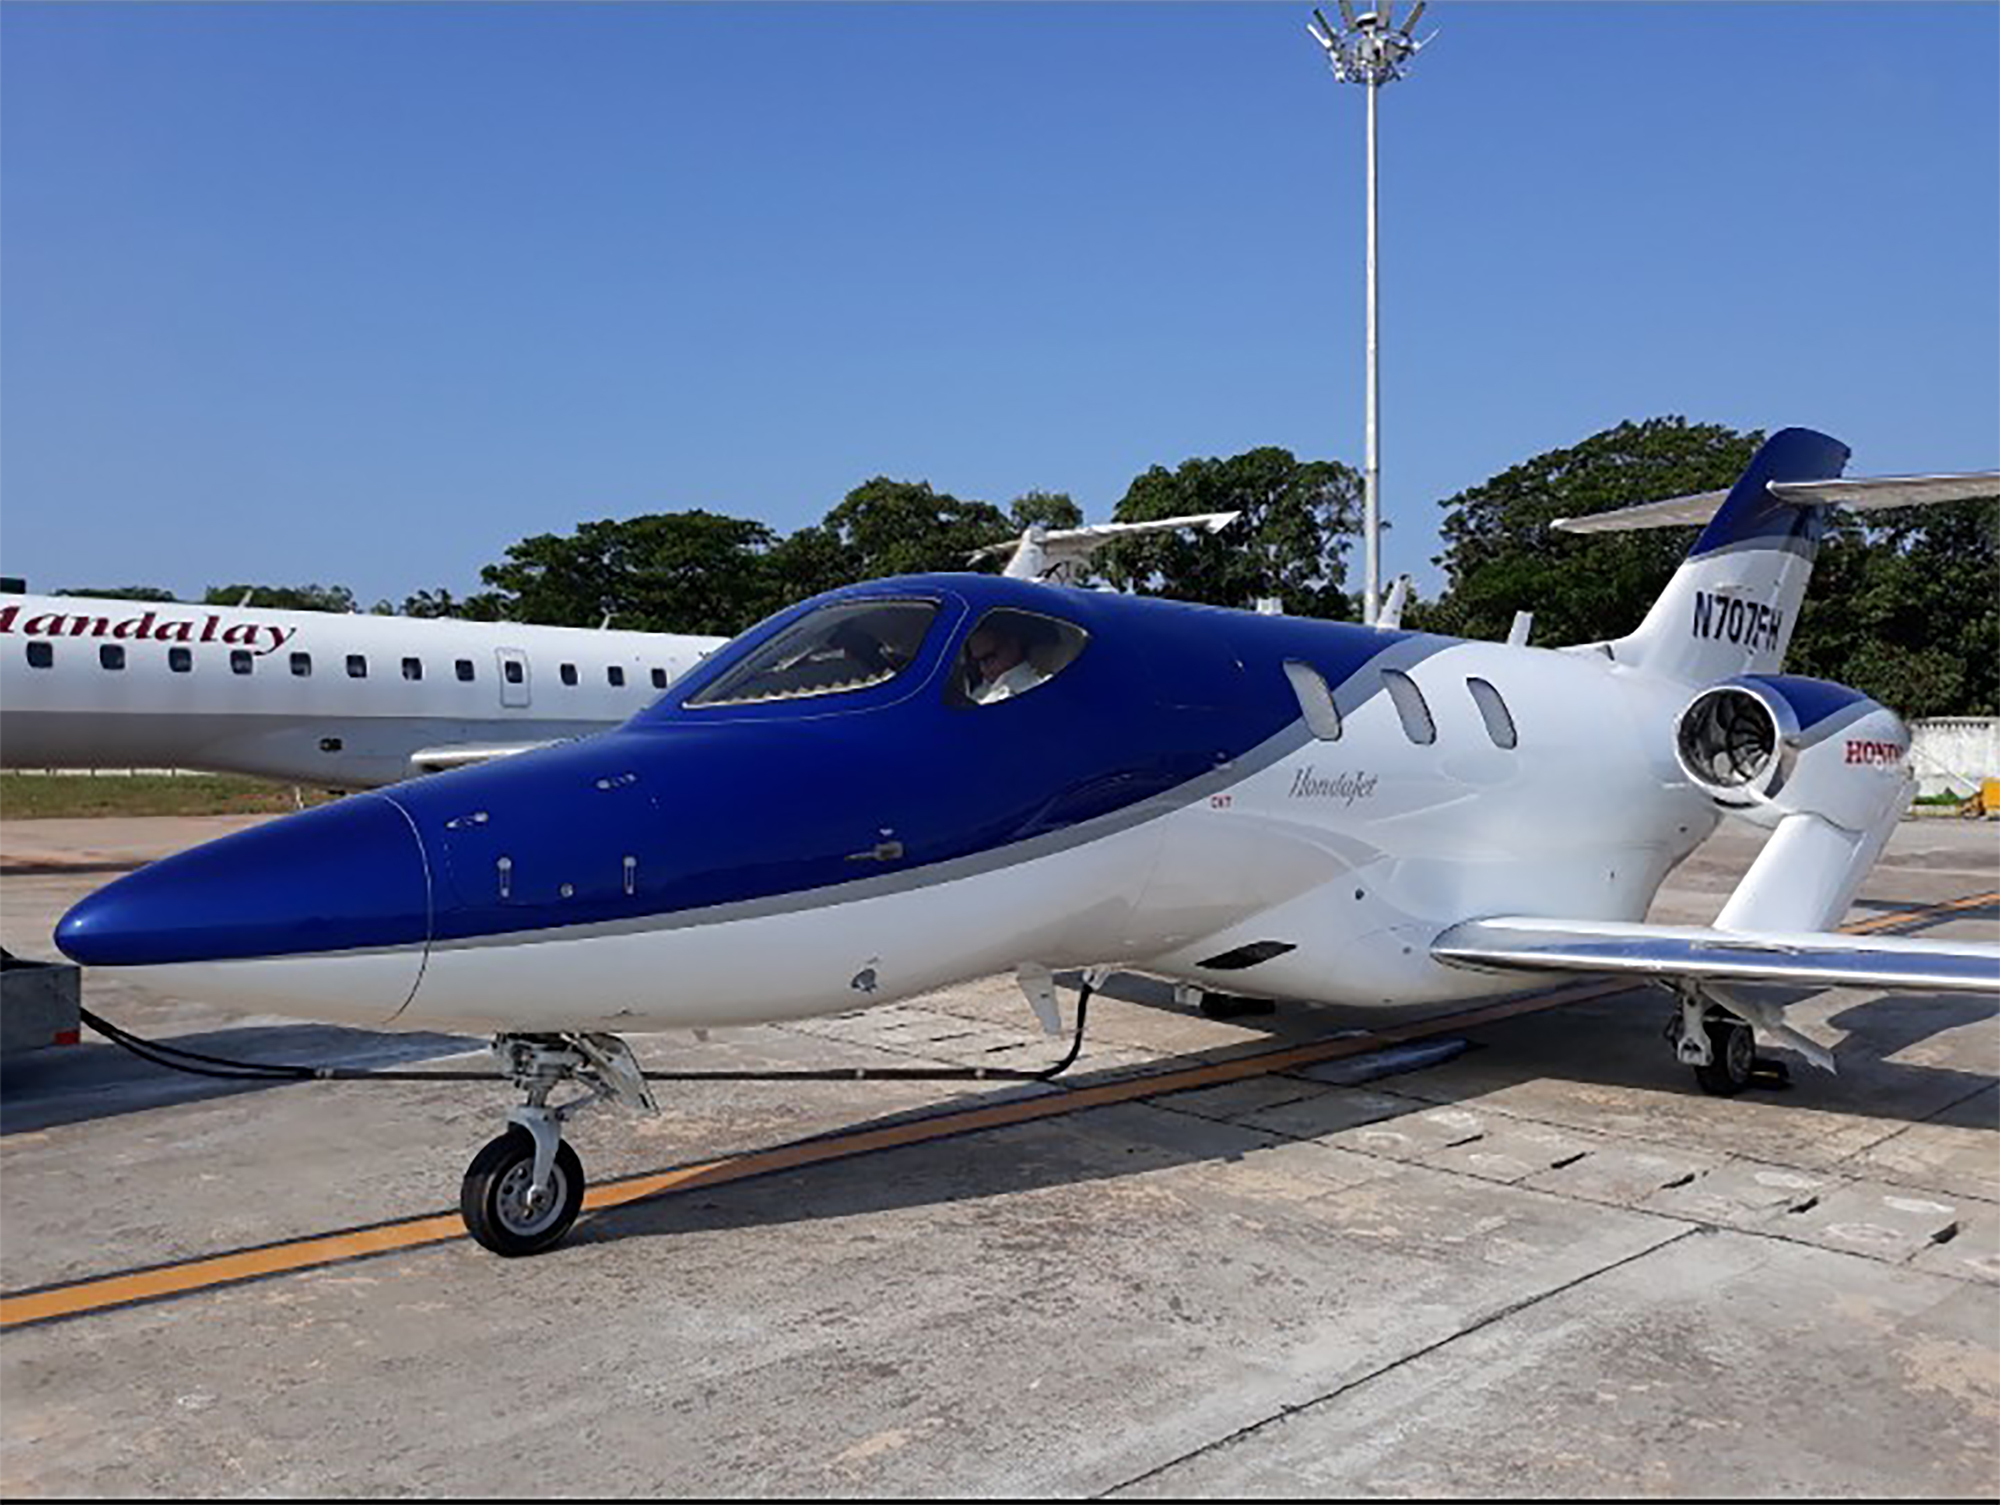 Kpo Plans To Sell Honda Jet Aircrafts In Myanmar Eleven Media Group Co Ltd